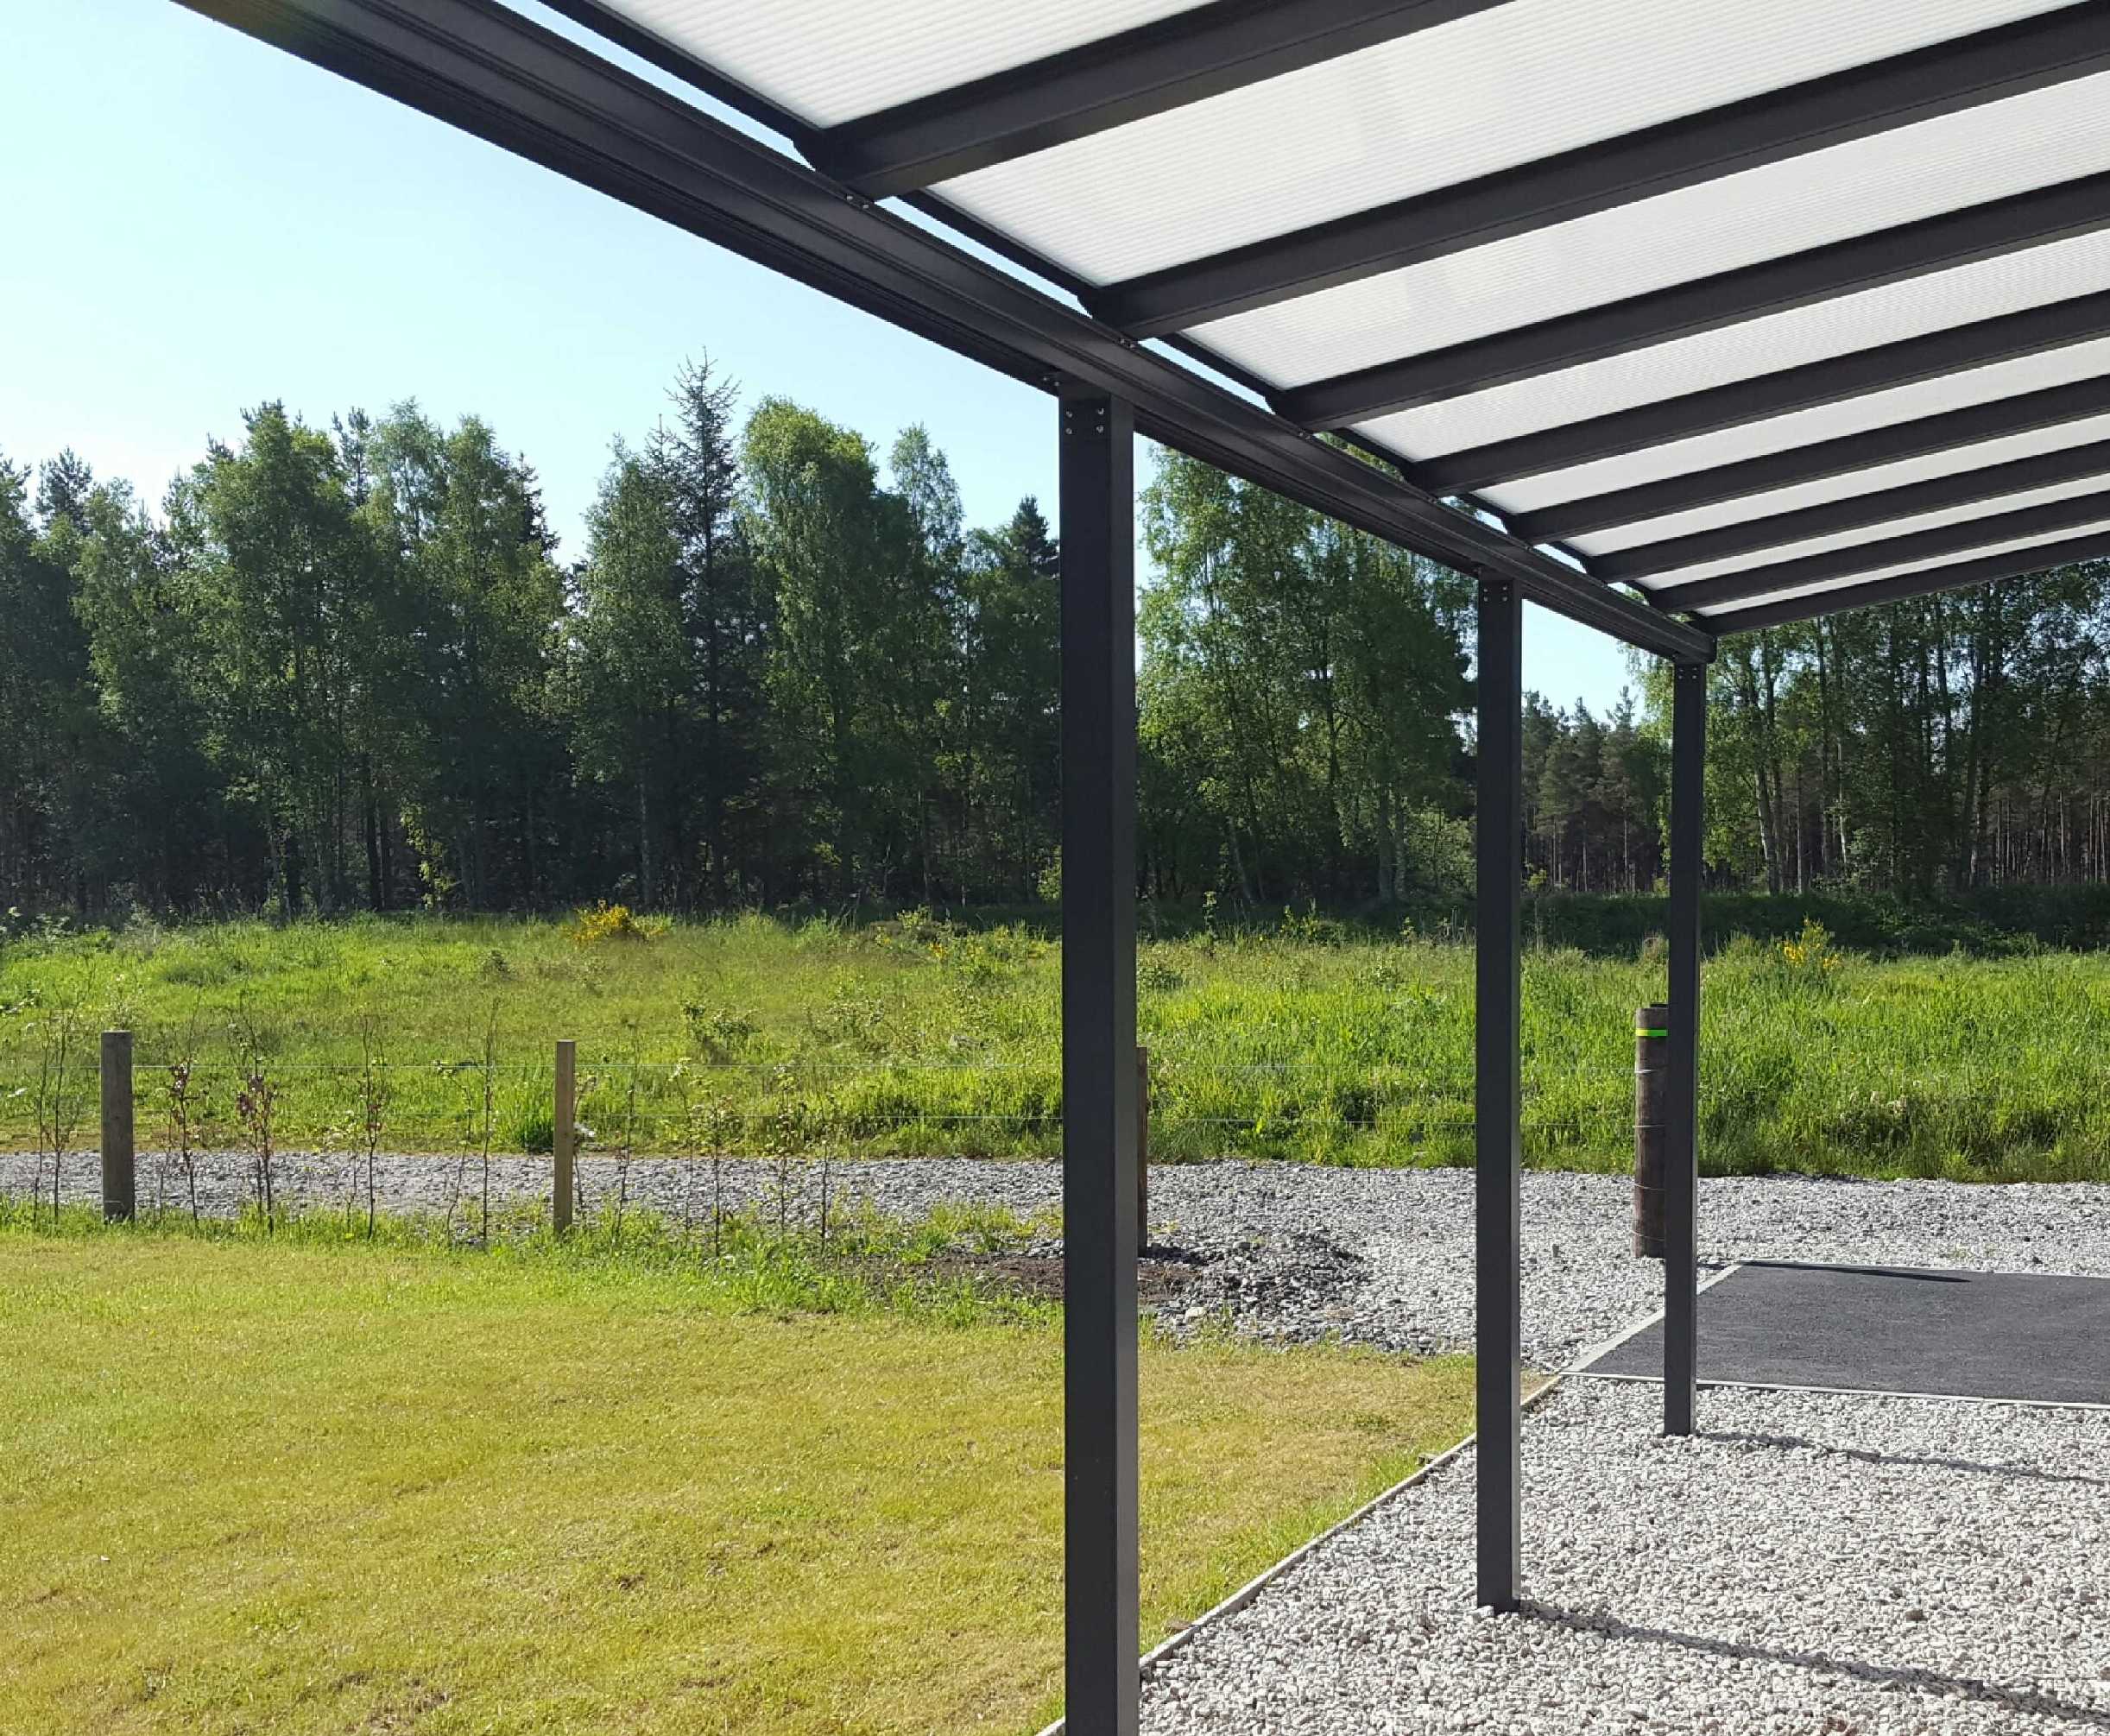 Omega Smart Lean-To Canopy, Anthracite Grey, 6mm Glass Clear Plate Polycarbonate Glazing - 9.1m (W) x 2.0m (P), (5) Supporting Posts